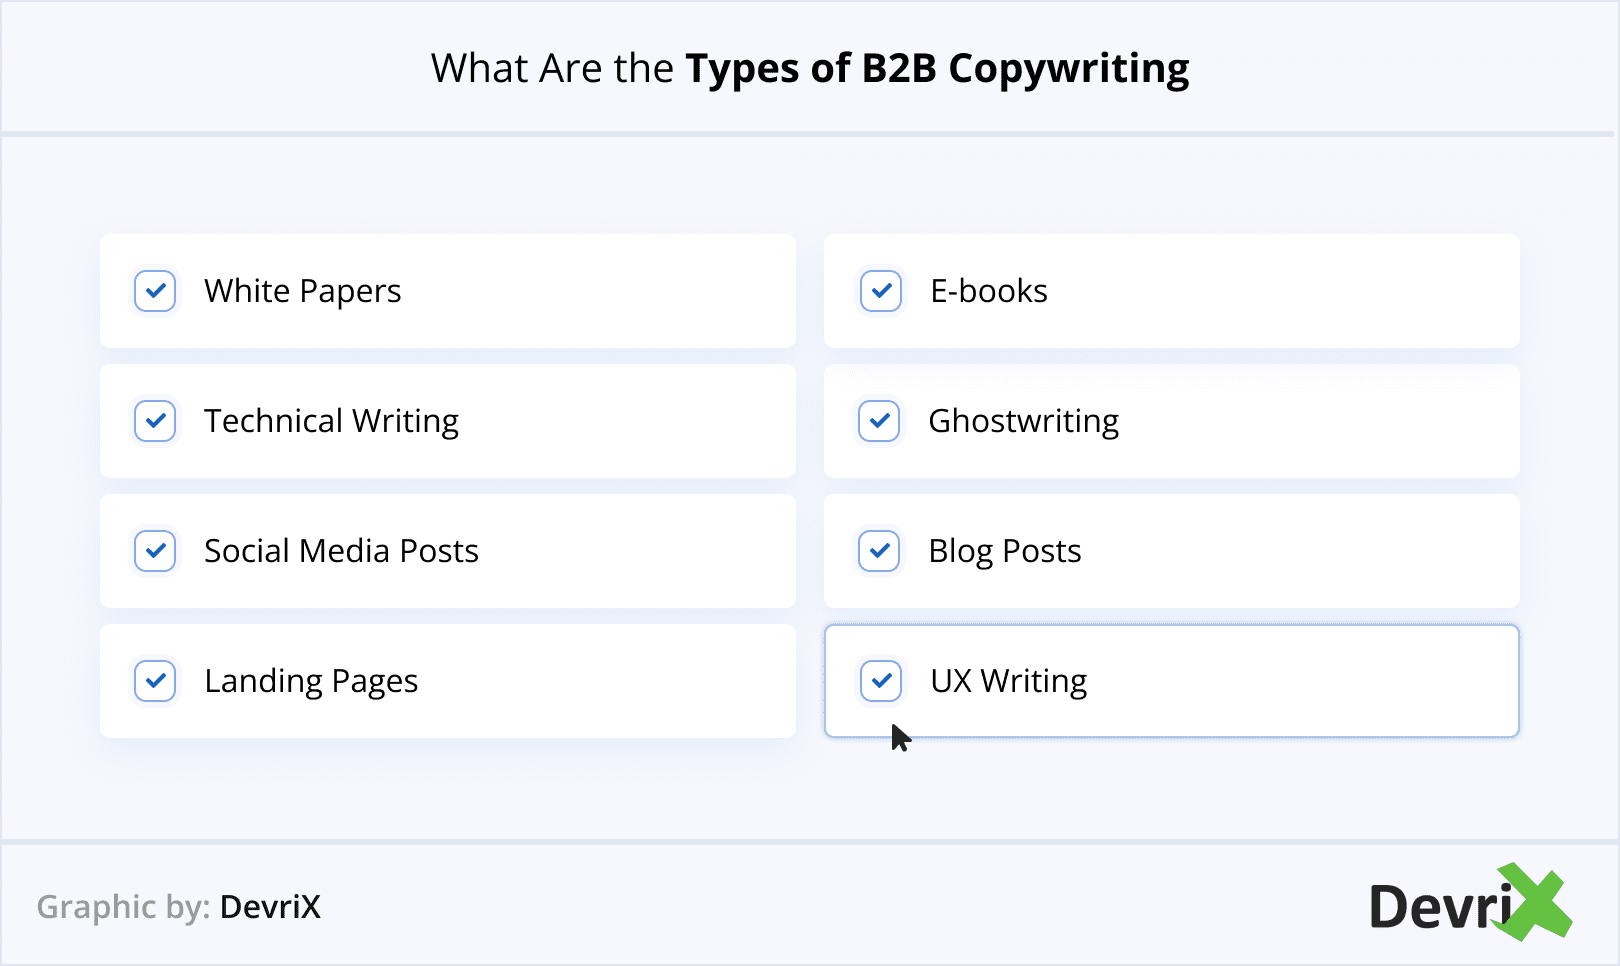 What Are the Types of B2B Copywriting